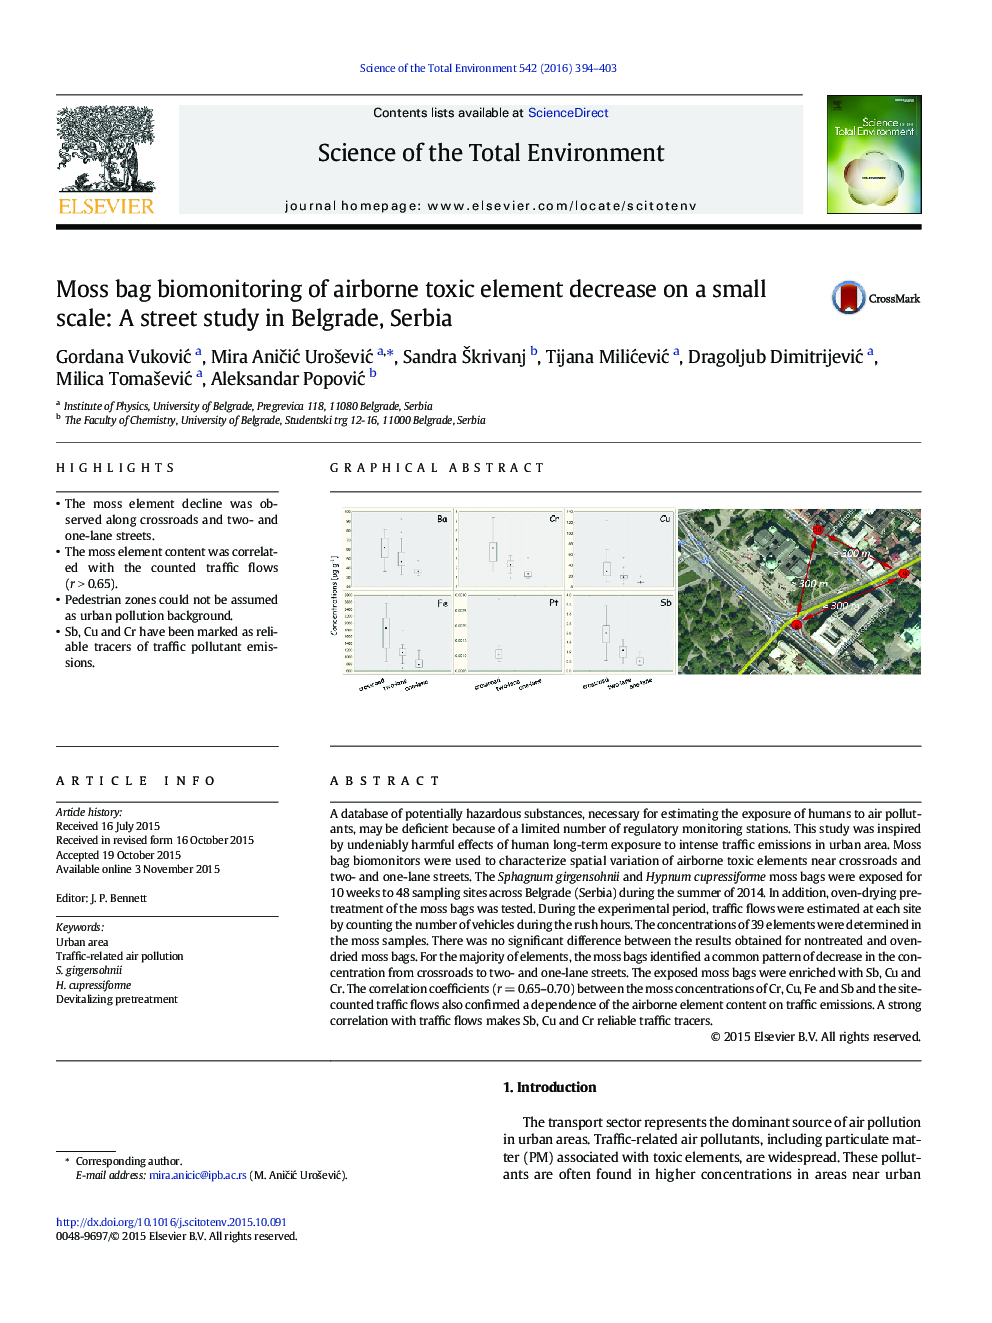 Moss bag biomonitoring of airborne toxic element decrease on a small scale: A street study in Belgrade, Serbia